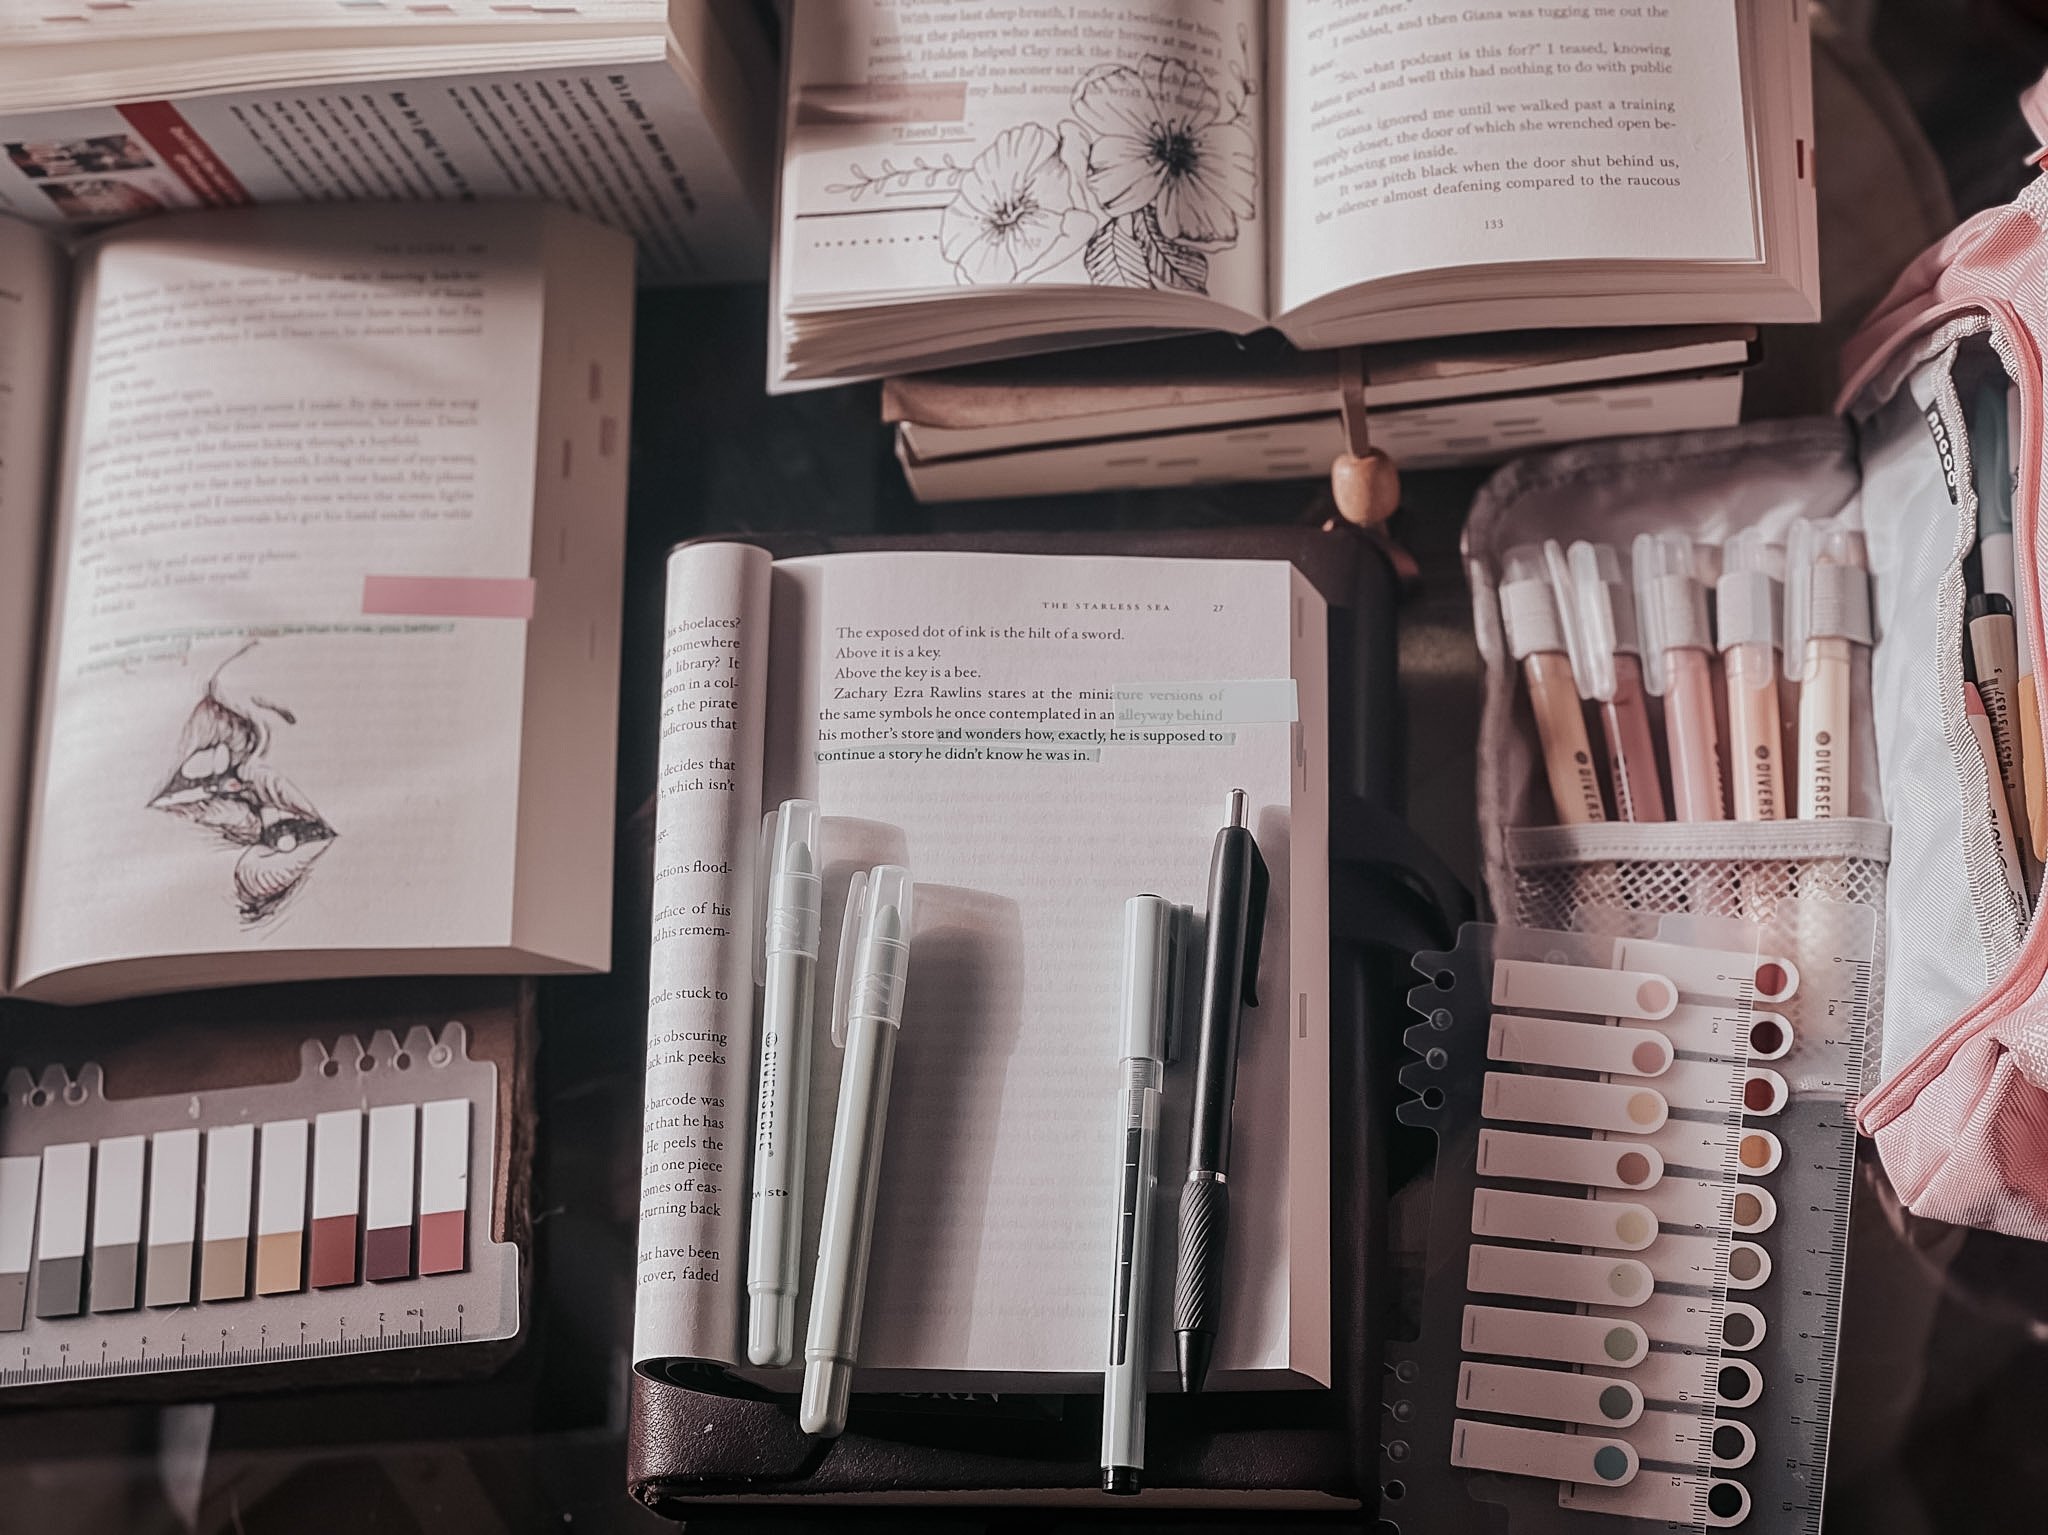 Bookstagram essentials: An image of various annotation supplies, including colorful pens, sticky notes, and bookmarks, alongside stacks of books. Learn how to create engaging content and build a vibrant book-loving community.